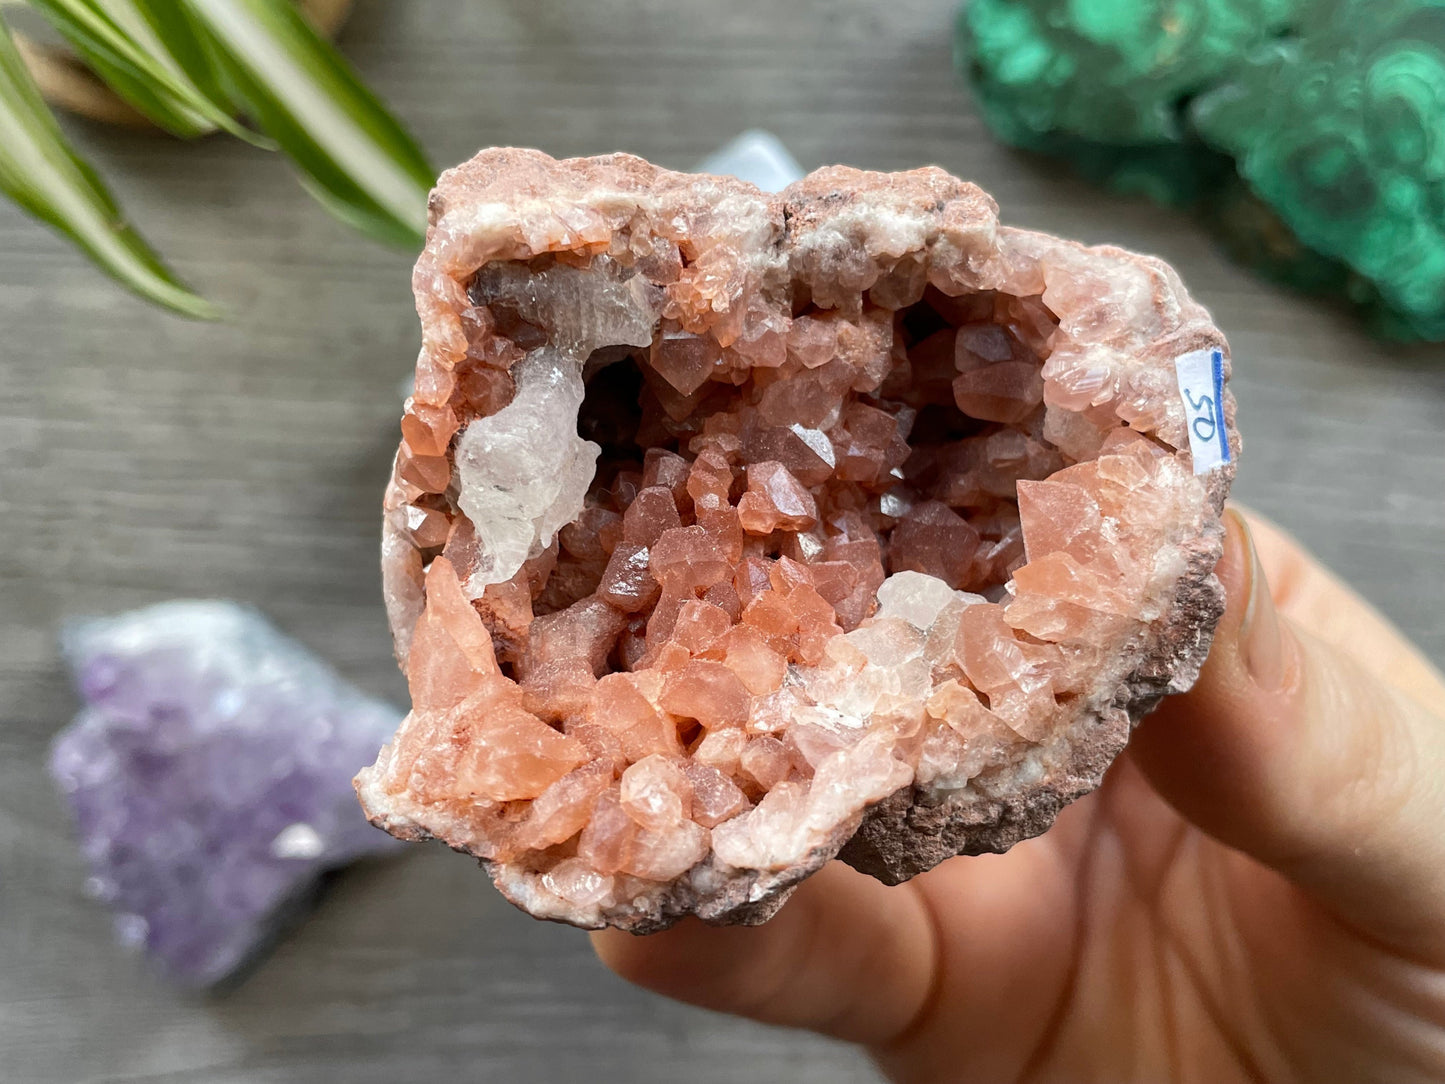 Pink Amethyst Geode Crystal with Calcite Formations close up